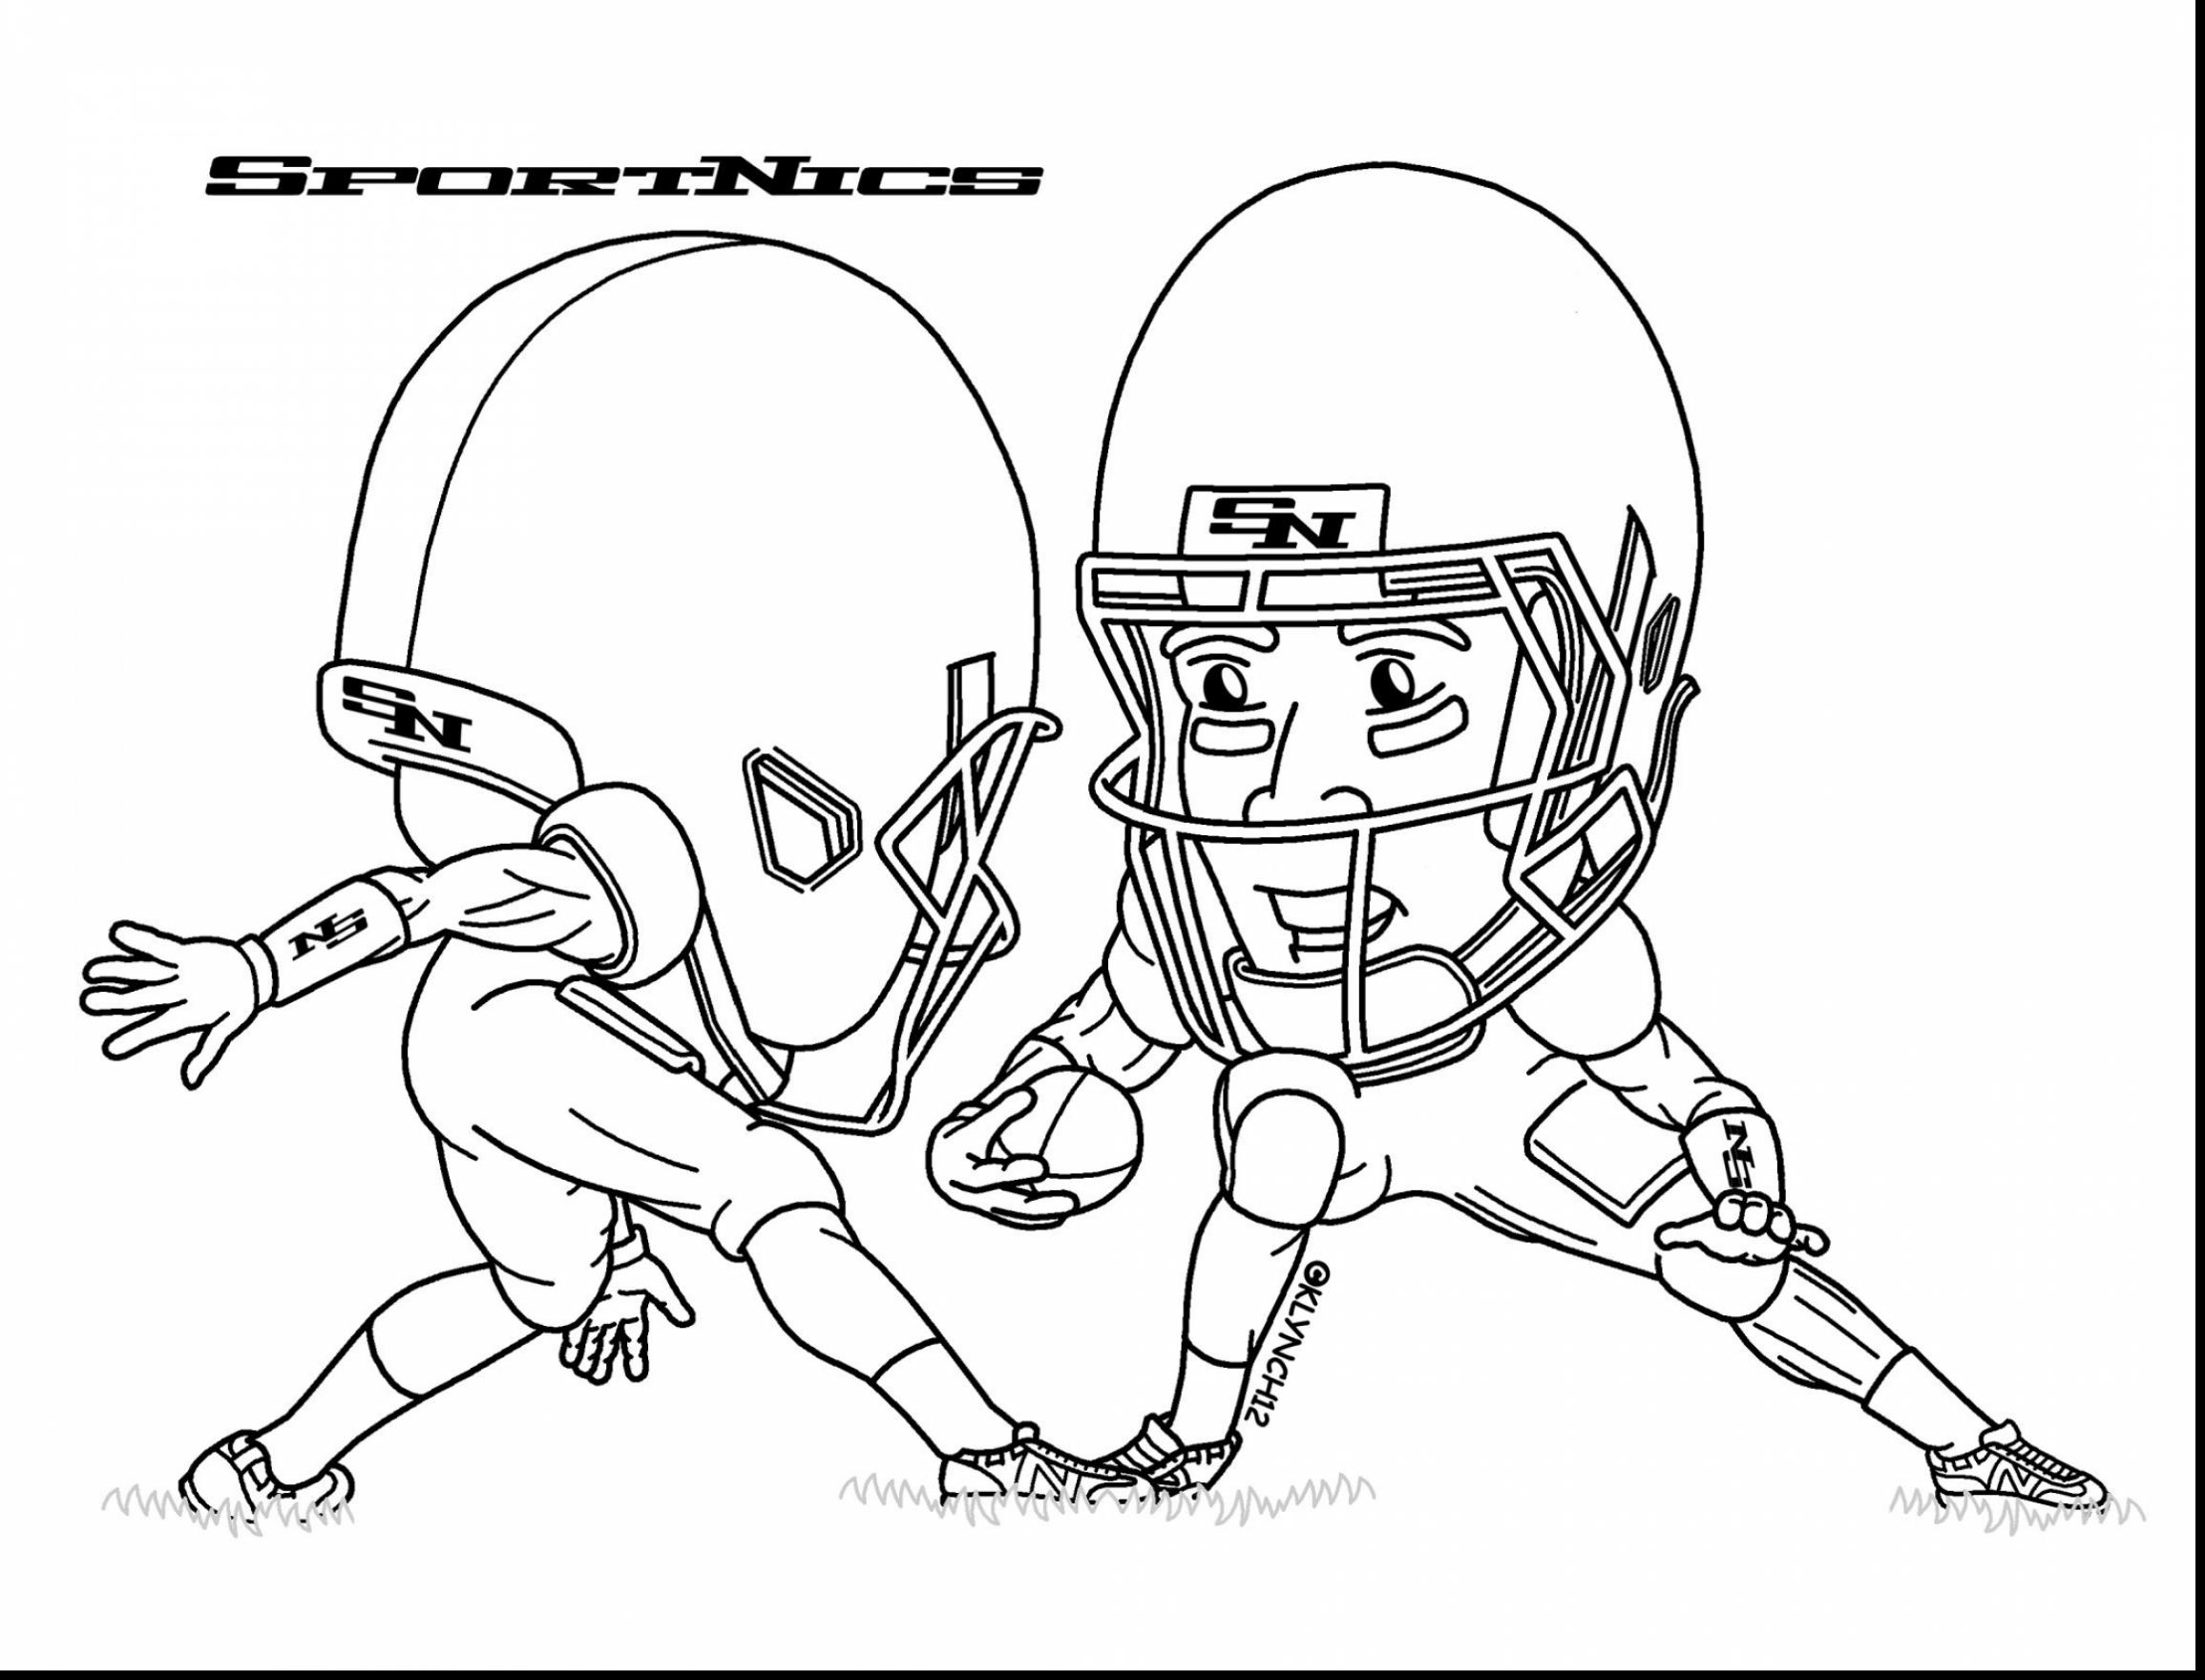 Nfl Coloring Pages To Print at Free printable